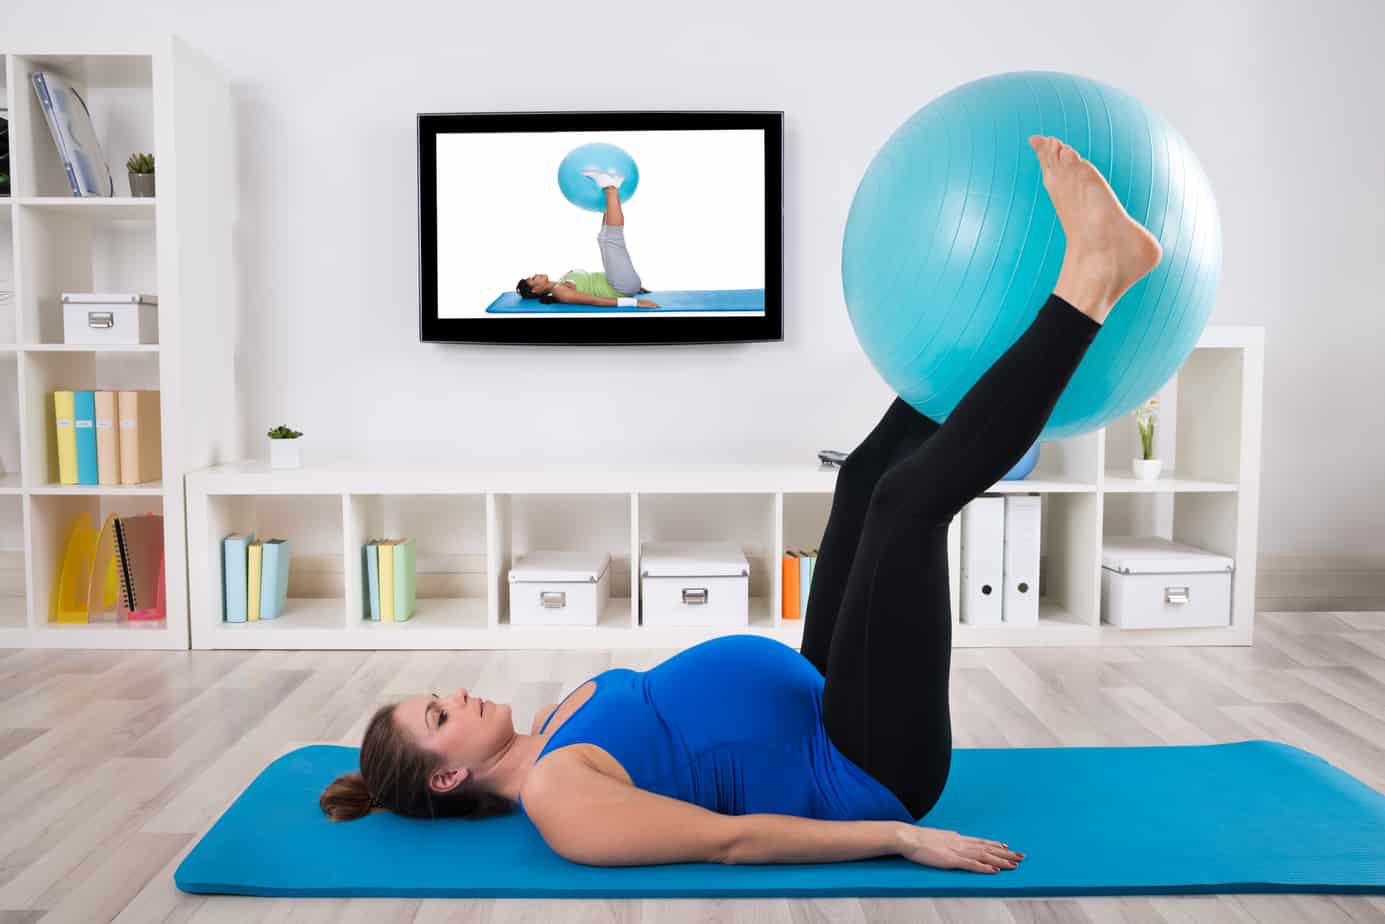 Pregnant woman exercising with exercise ball in living room.